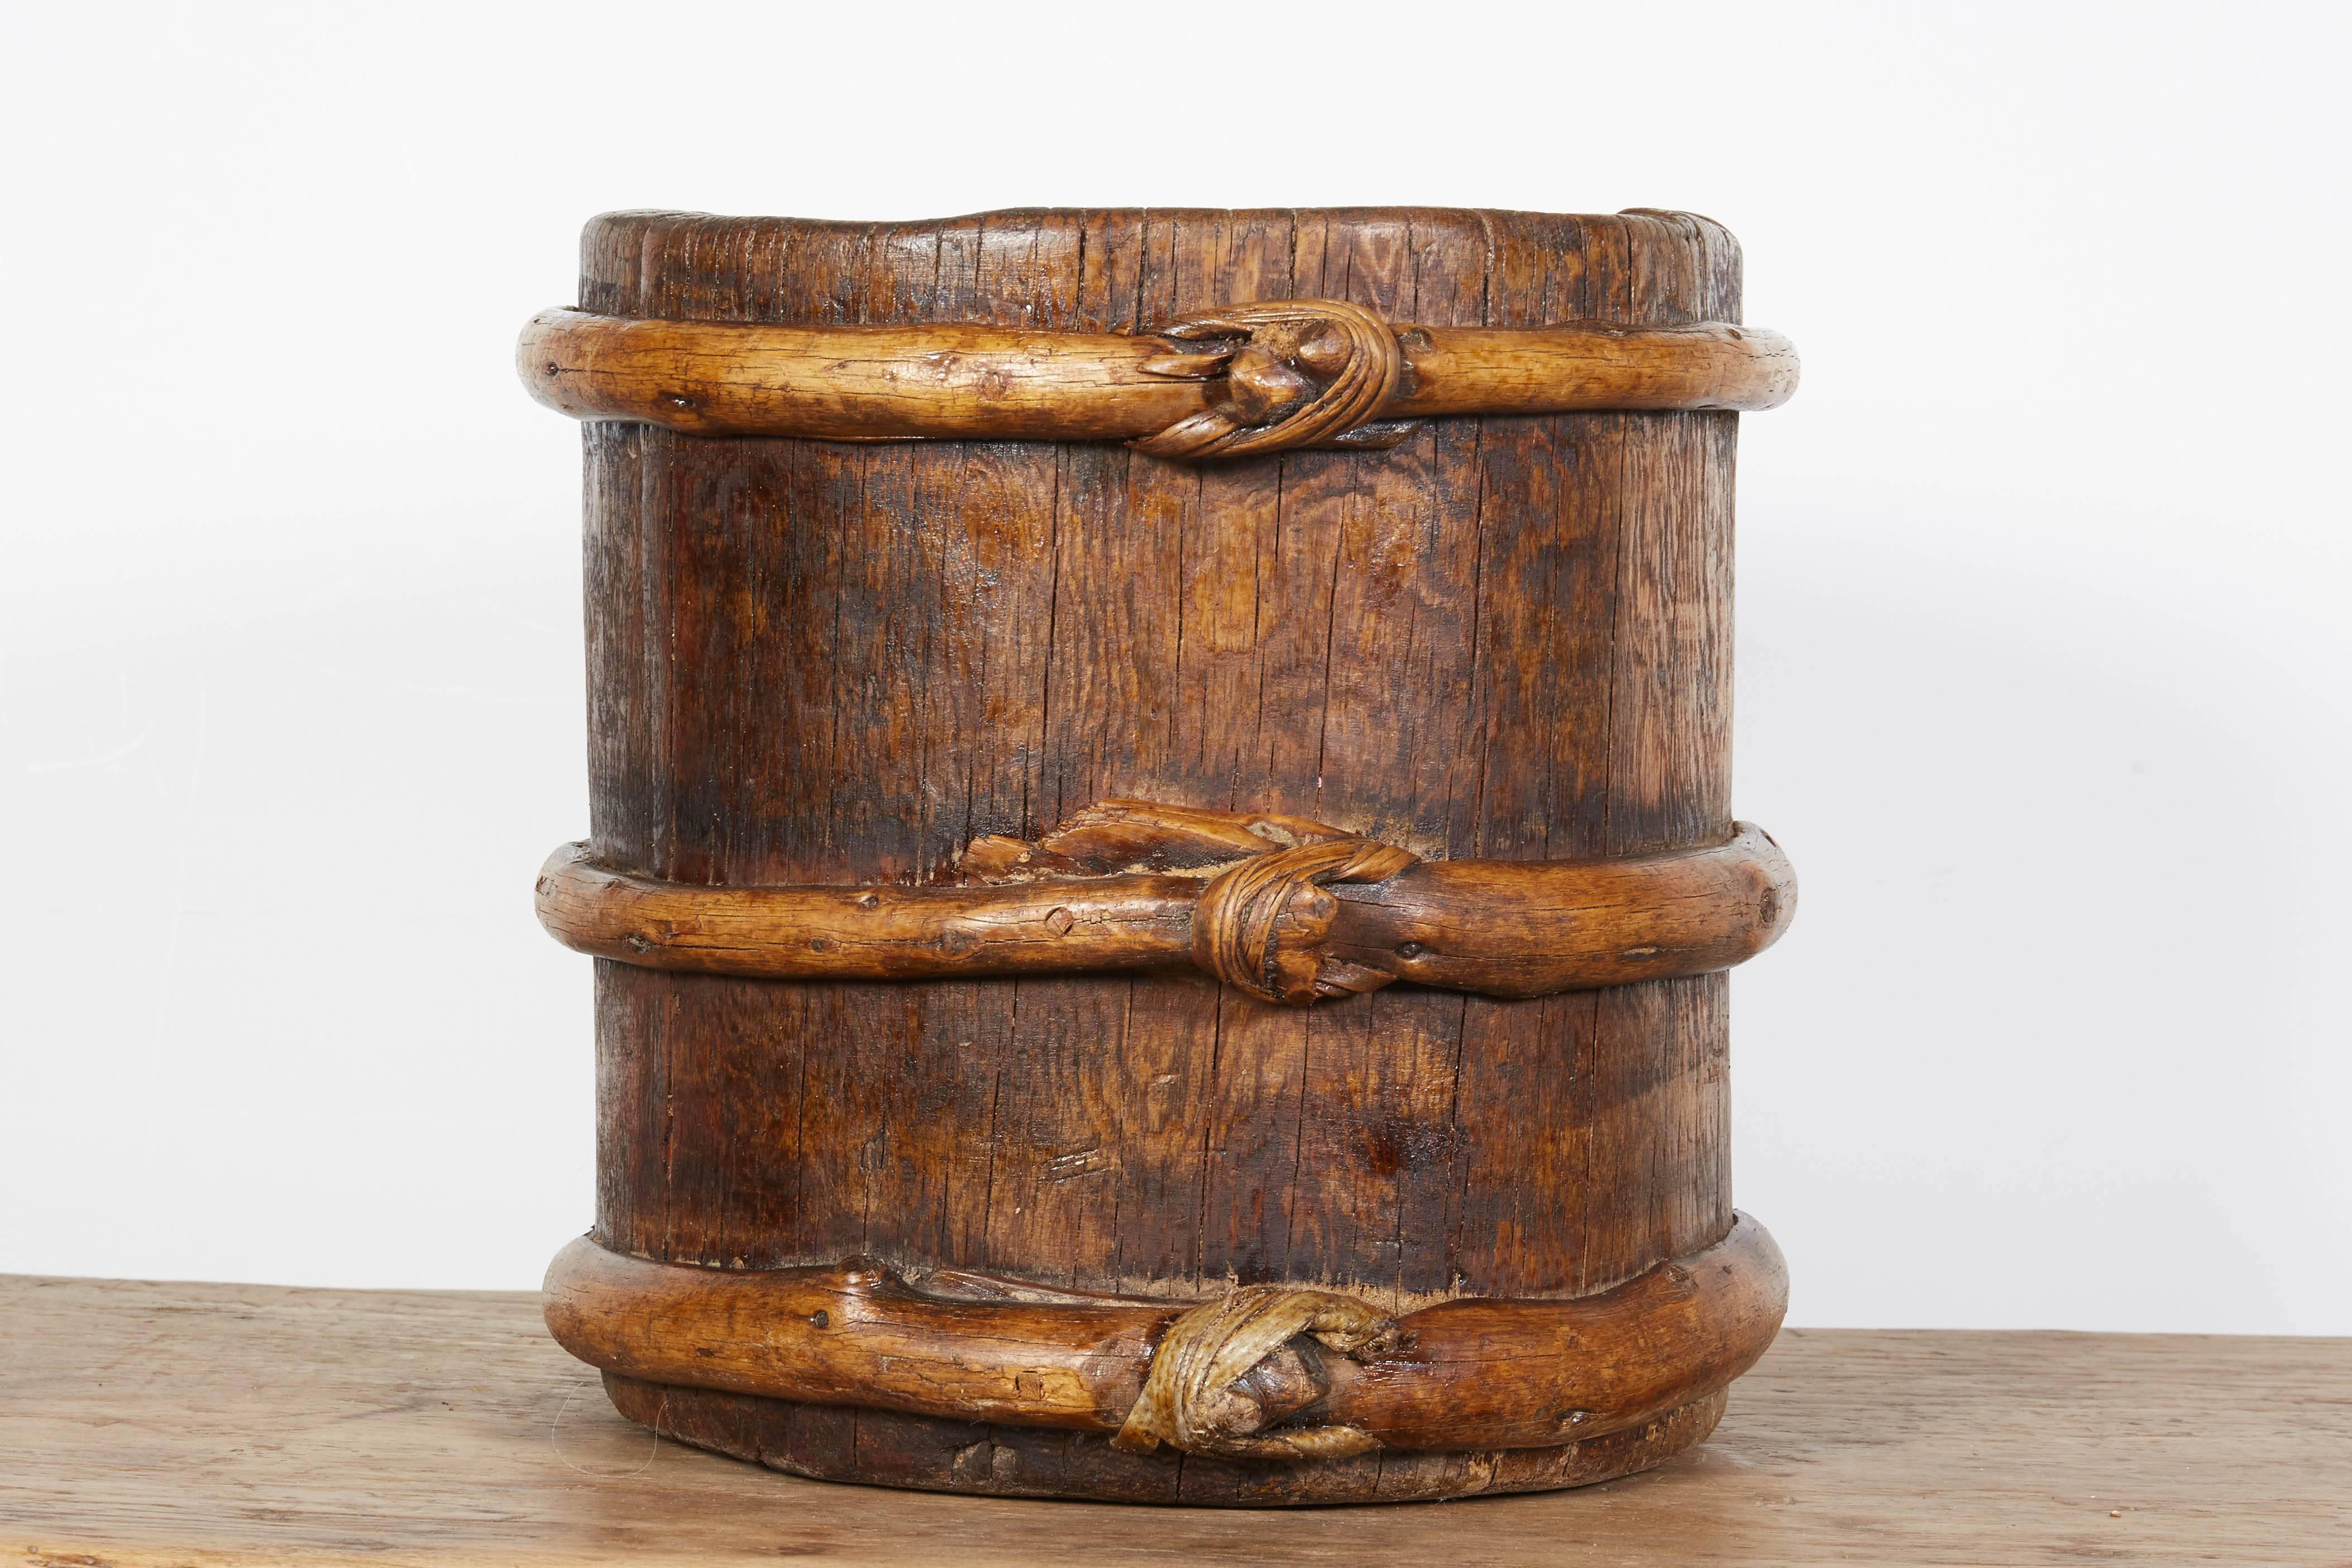 Chinese Antique Tibetan Yak Butter Churn with Decorative Knots For Sale